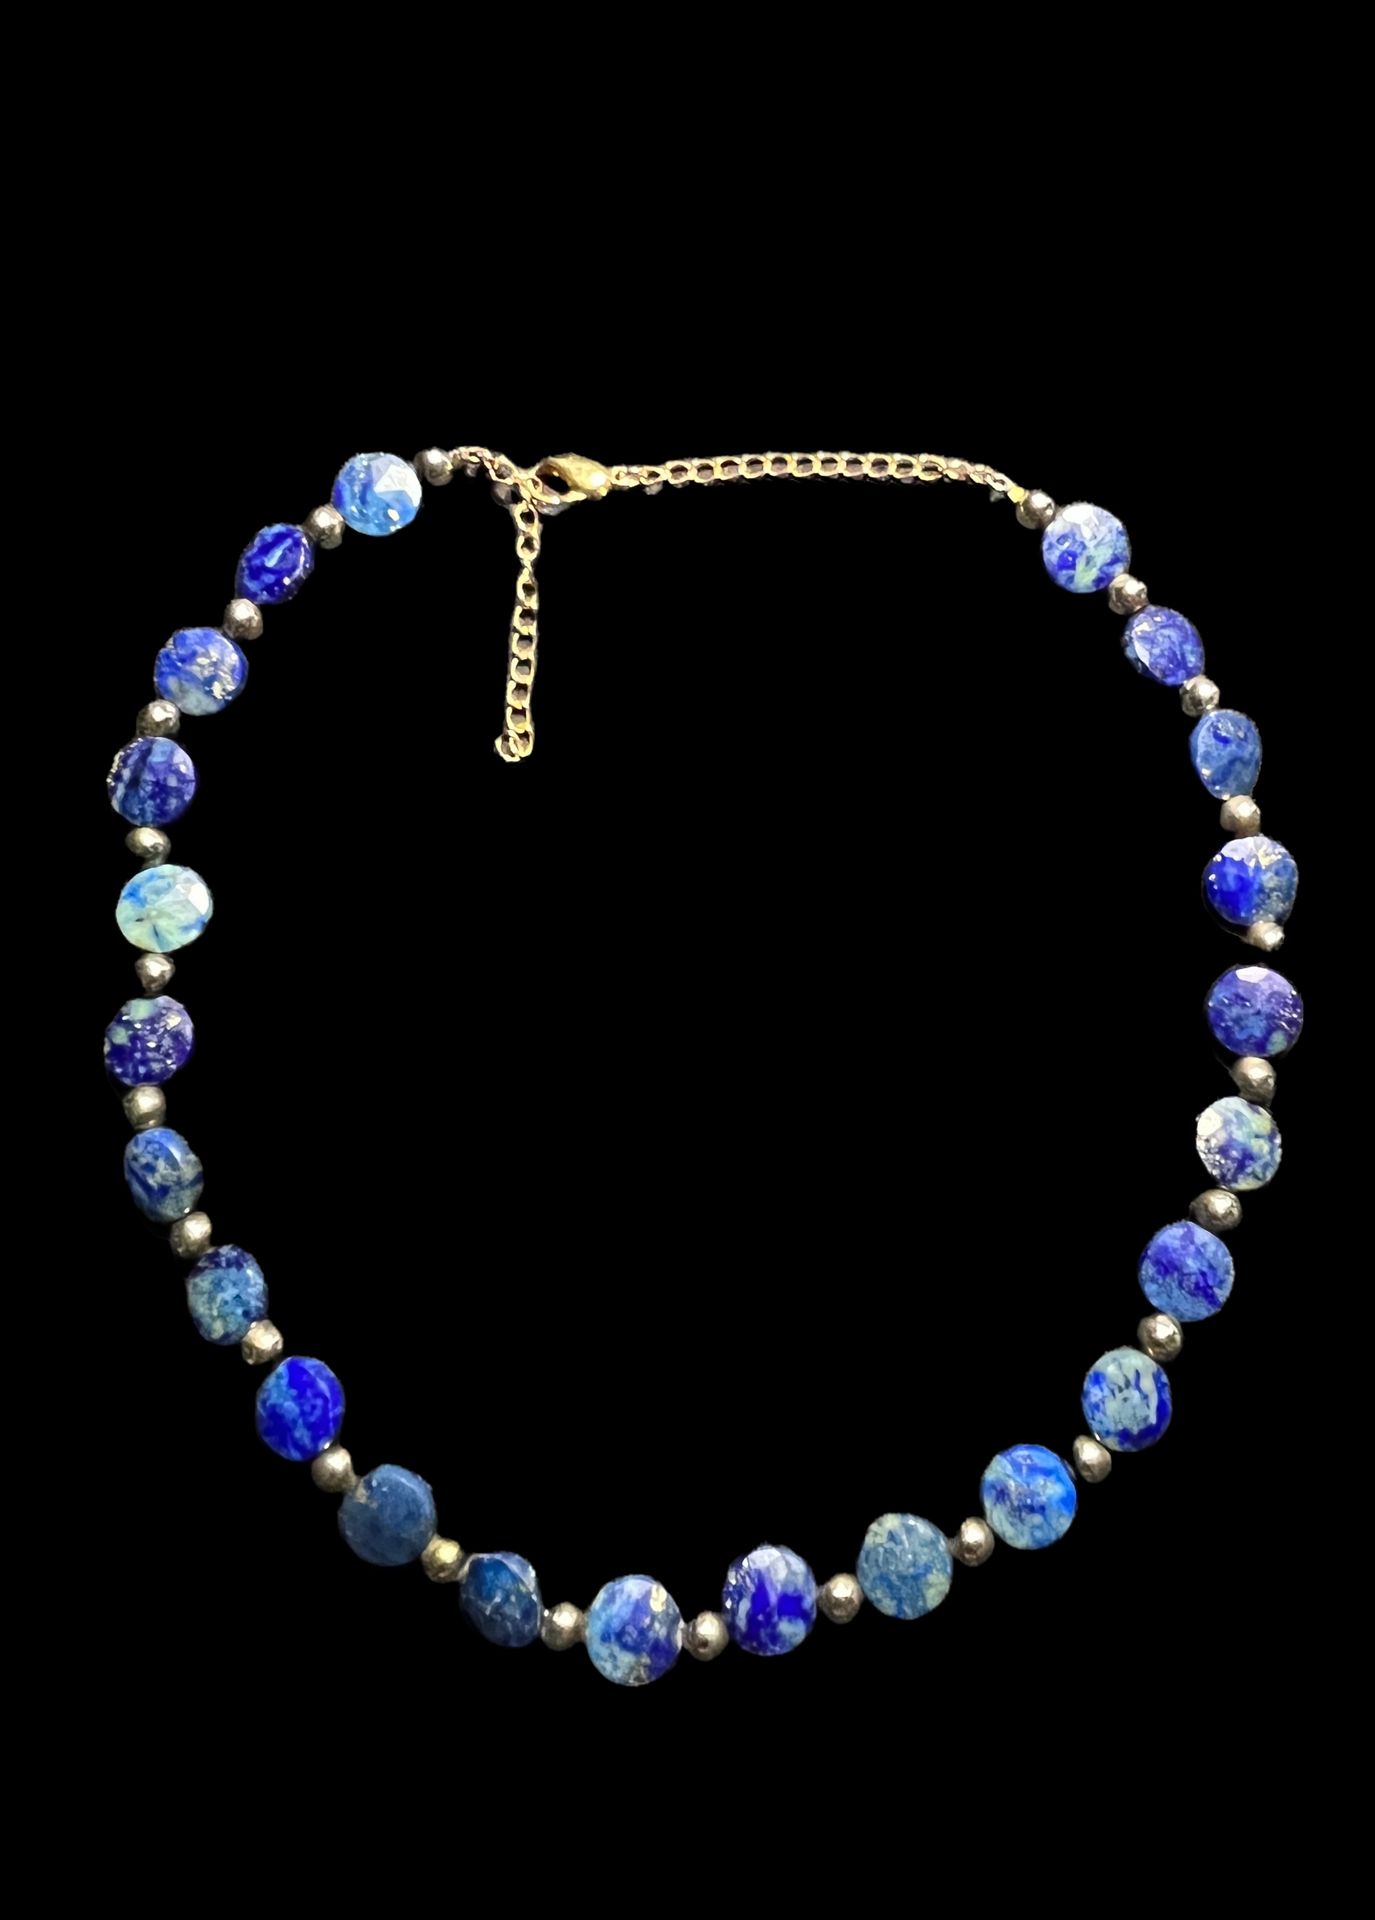 Null Necklace composed of faceted discs of sodalite bathed alternating with silv&hellip;